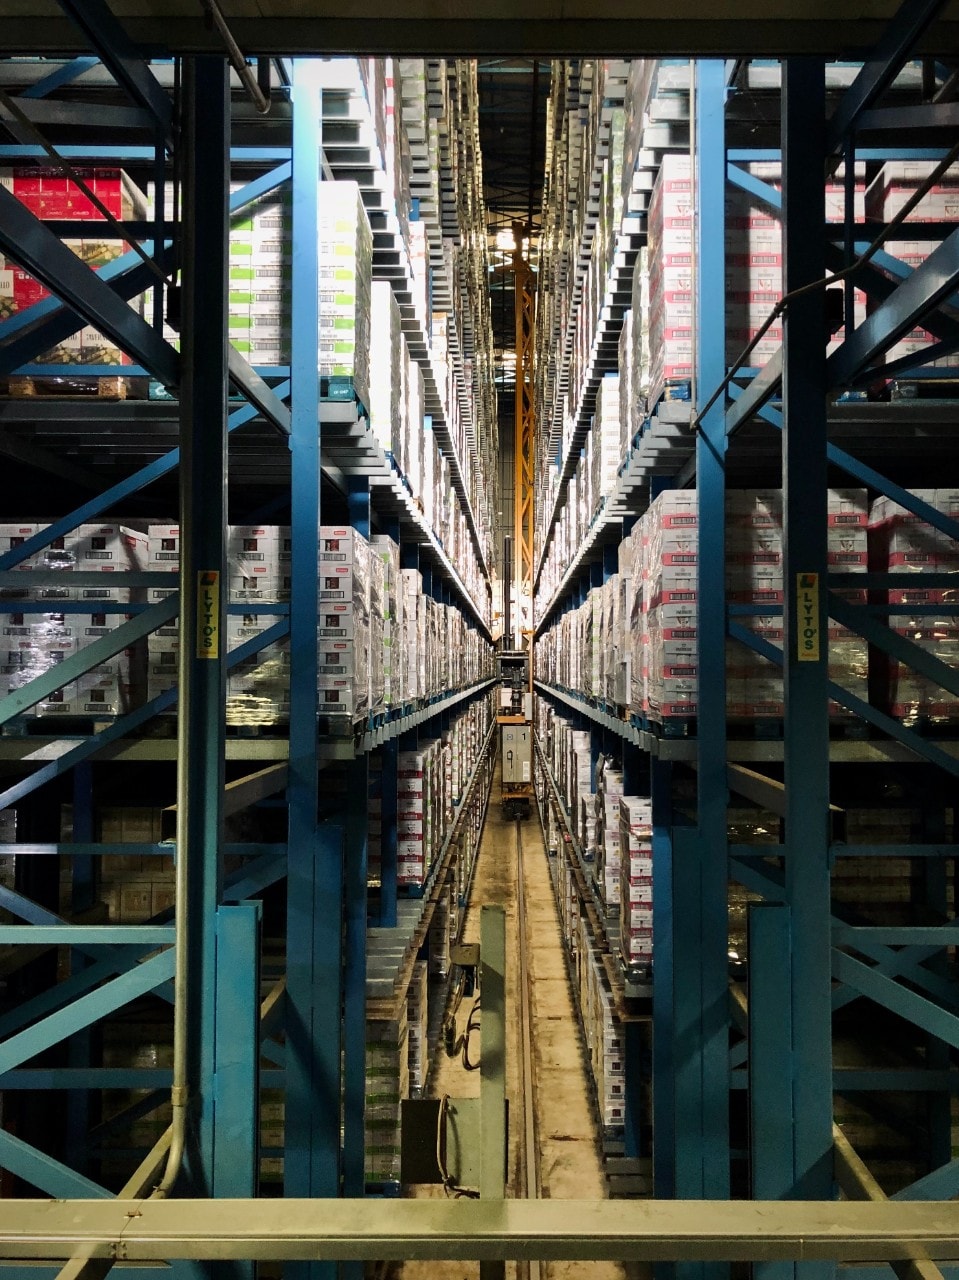 An automated warehouse with high shelving